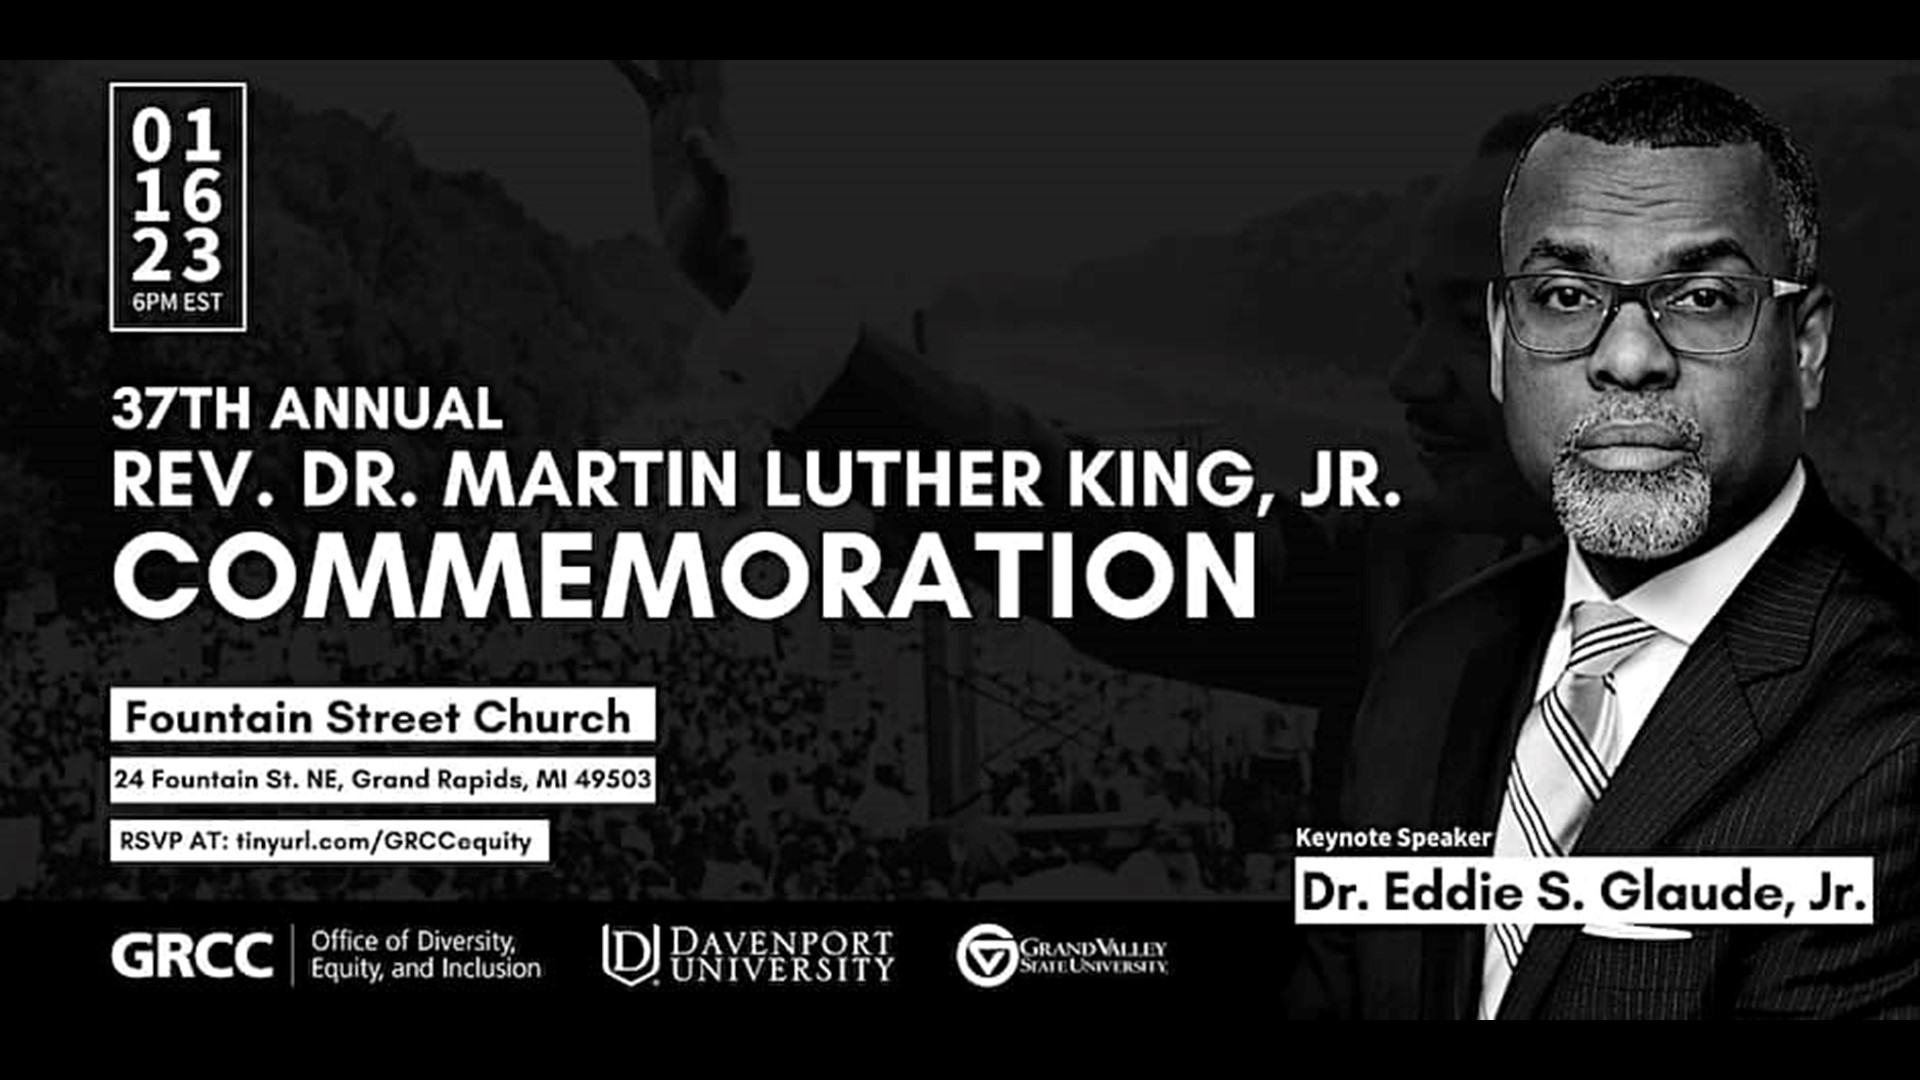 Universities in West Michigan commemorated the life and legacy of Dr. Martin Luther King Jr. Monday night.